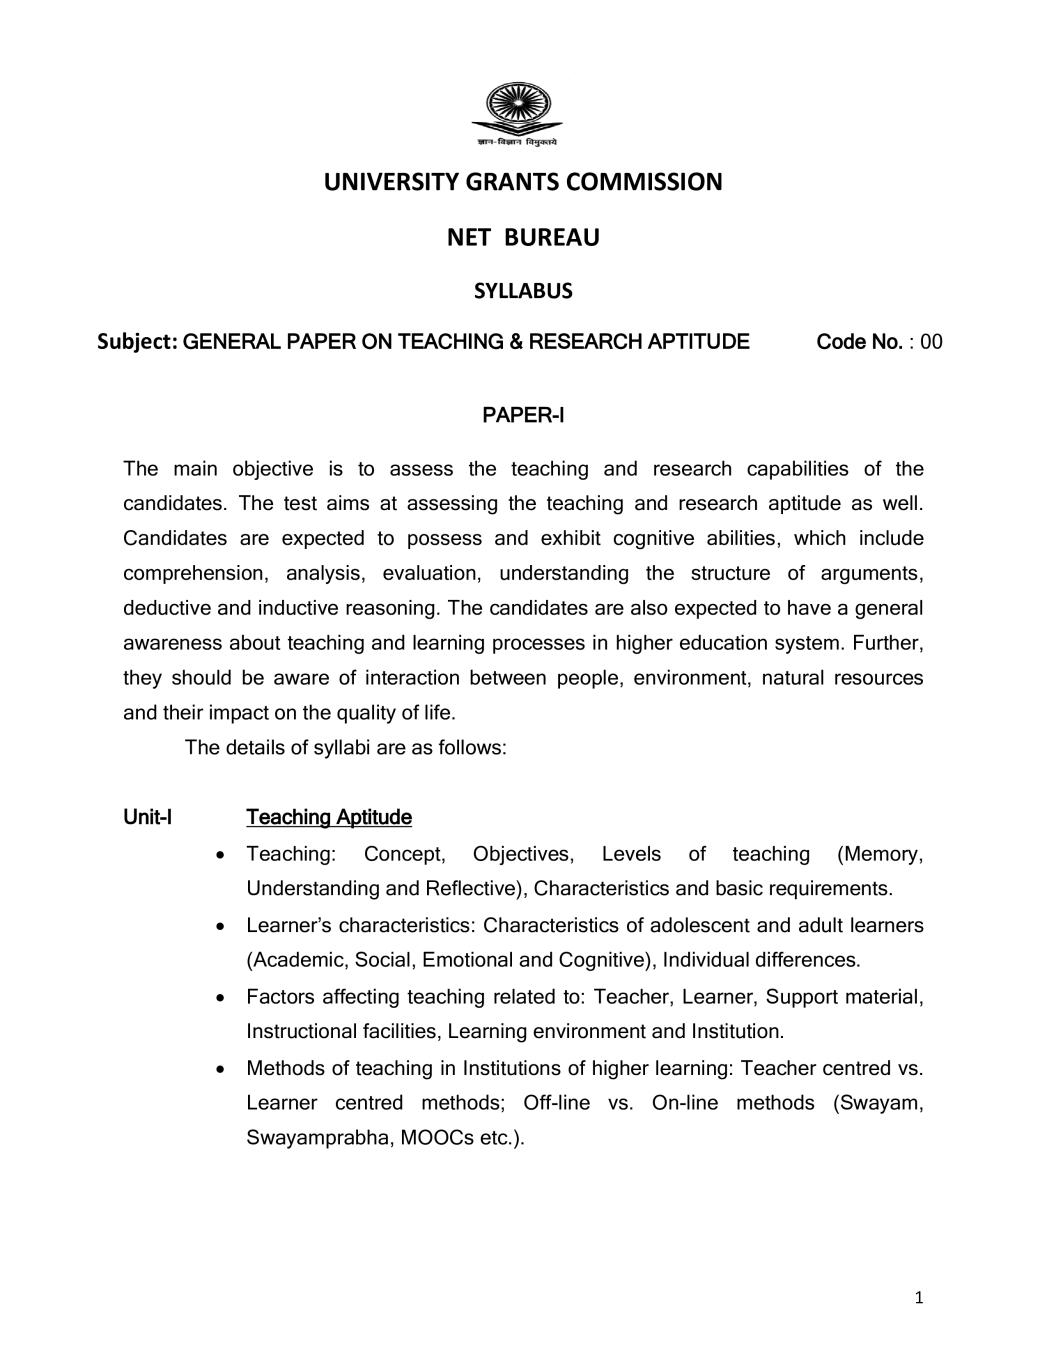 UGC NET Syllabus for Teaching Research Aptitude Paper - 1 2020 - Page 1